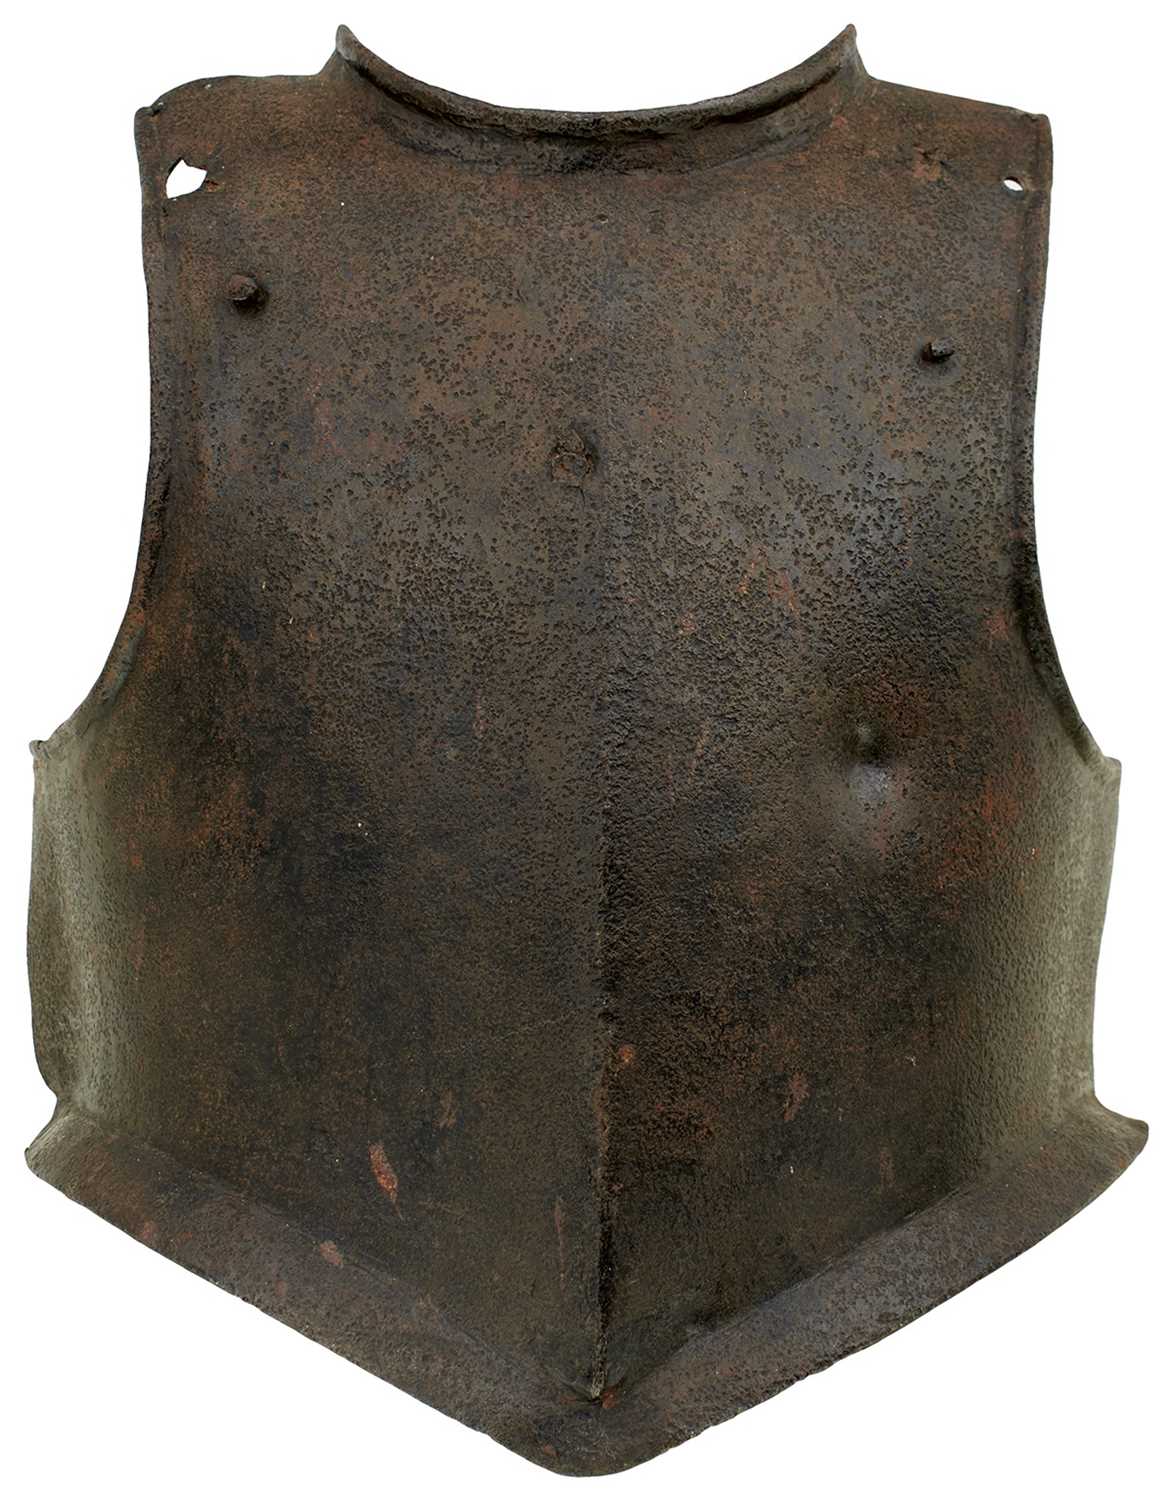 A 17TH CENTURY ENGLISH CIVIL WAR PERIOD BREAST AND BACK PLATE,